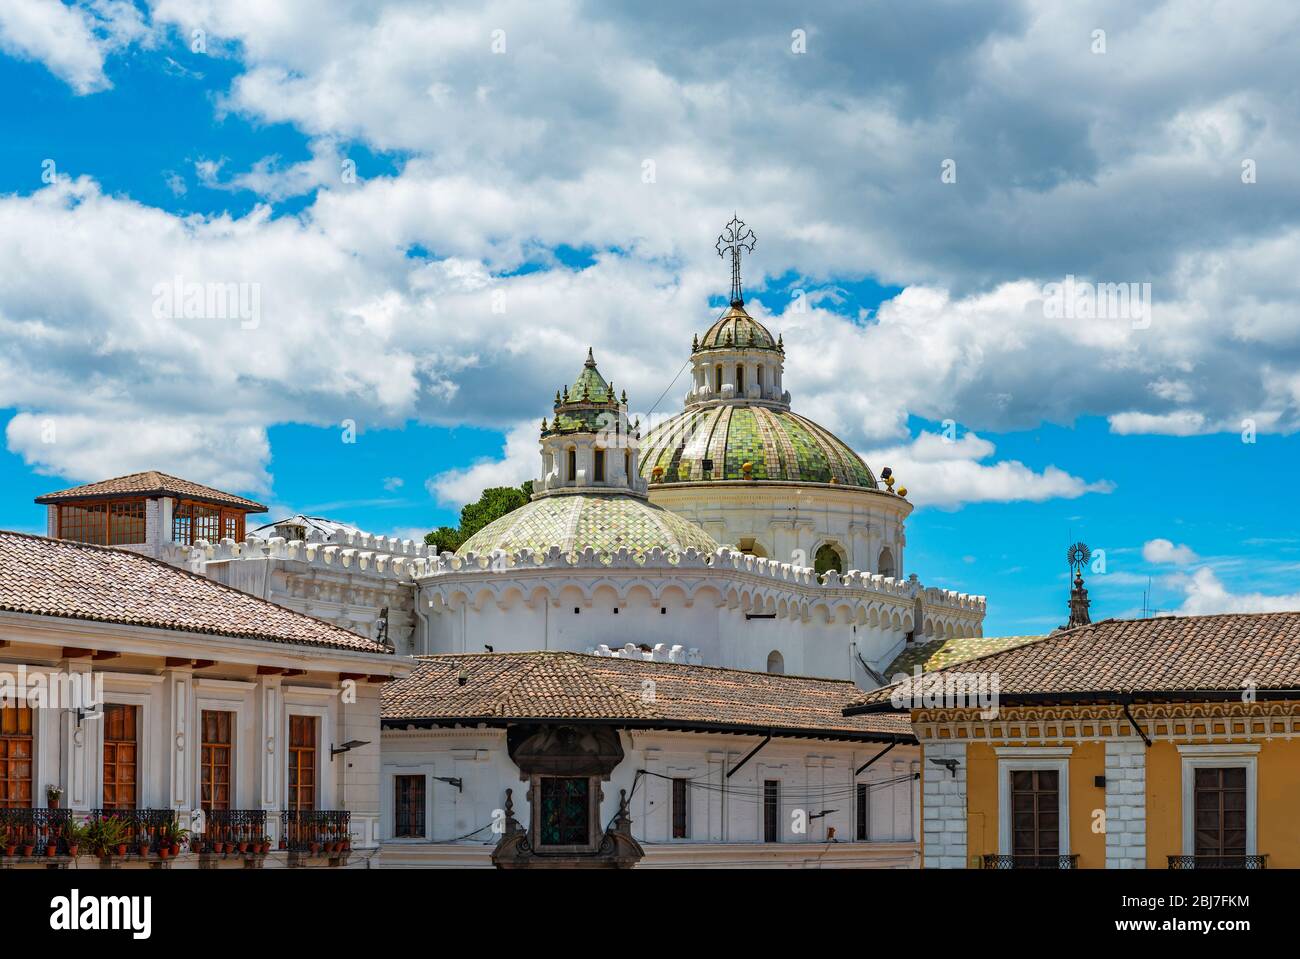 The domes of the Jesuit Compania de Jesus church and colonial style facades in the historic city center of Quito, Ecuador. Stock Photo